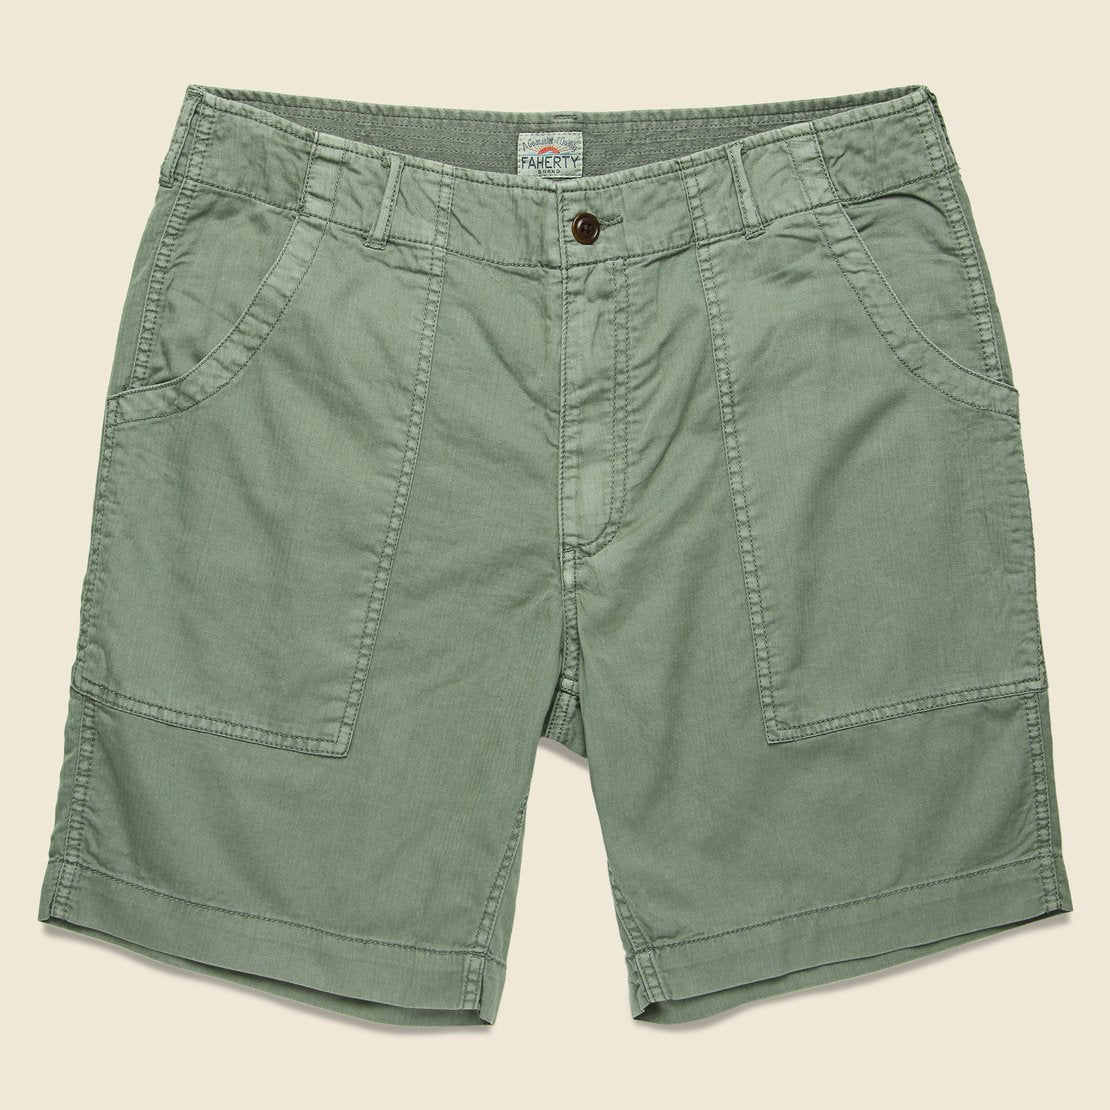 Faherty Camp Short - Olive